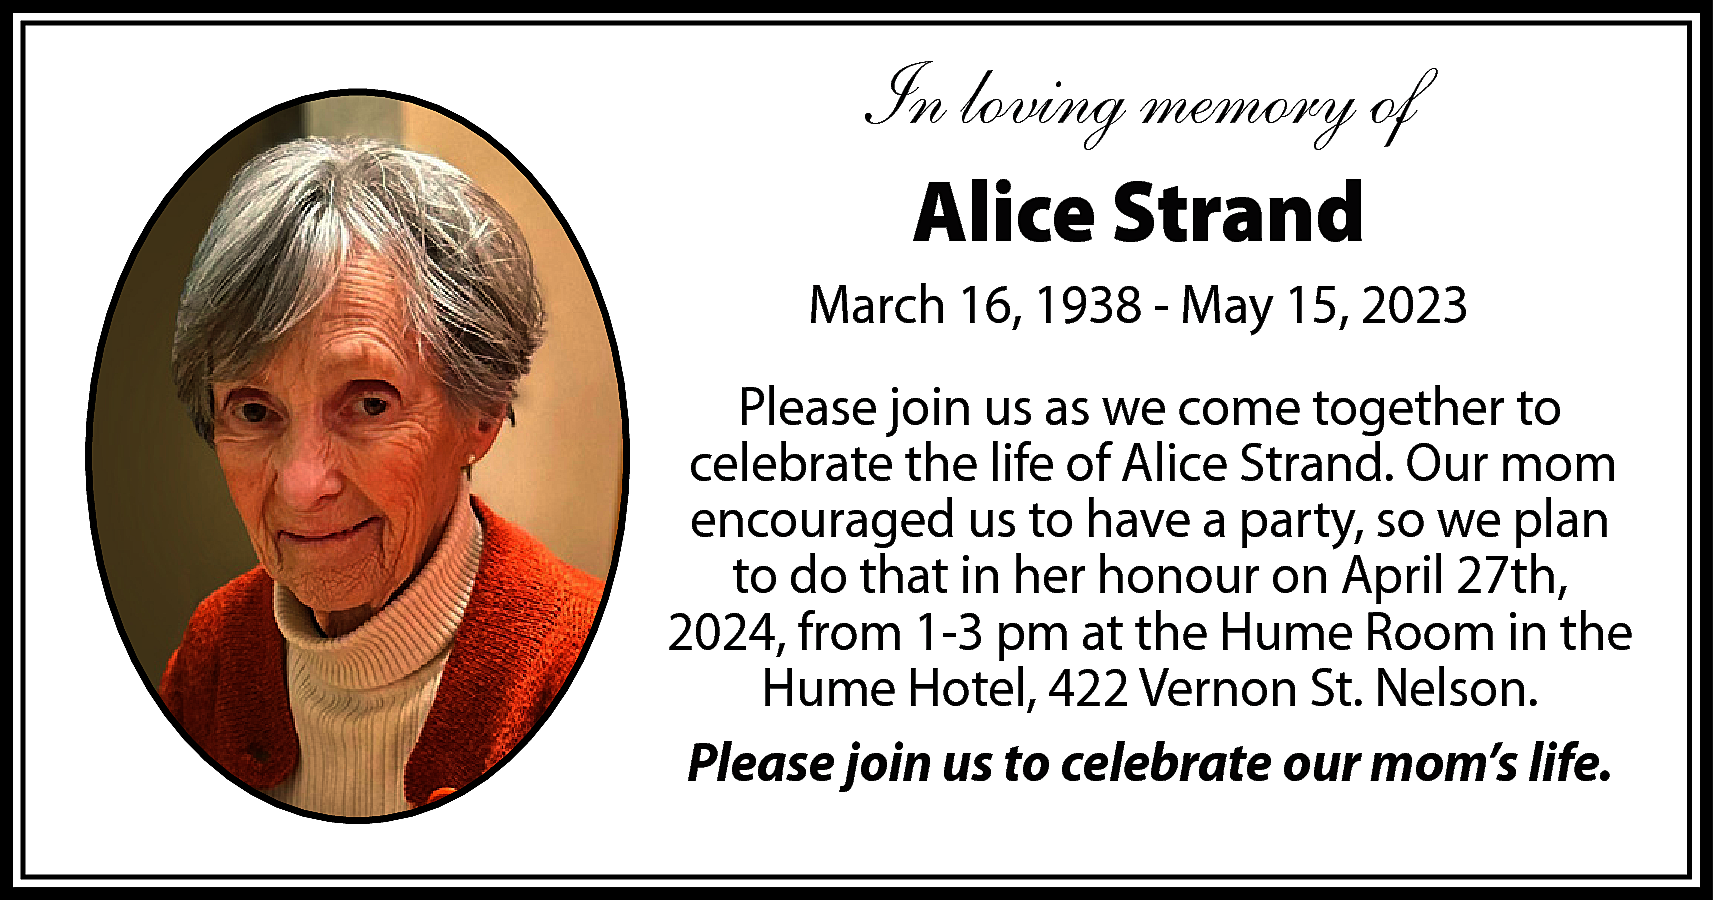 In loving memory of <br>Alice  In loving memory of  Alice Strand  March 16, 1938 - May 15, 2023  Please join us as we come together to  celebrate the life of Alice Strand. Our mom  encouraged us to have a party, so we plan  to do that in her honour on April 27th,  2024, from 1-3 pm at the Hume Room in the  Hume Hotel, 422 Vernon St. Nelson.  Please join us to celebrate our mom’s life.    